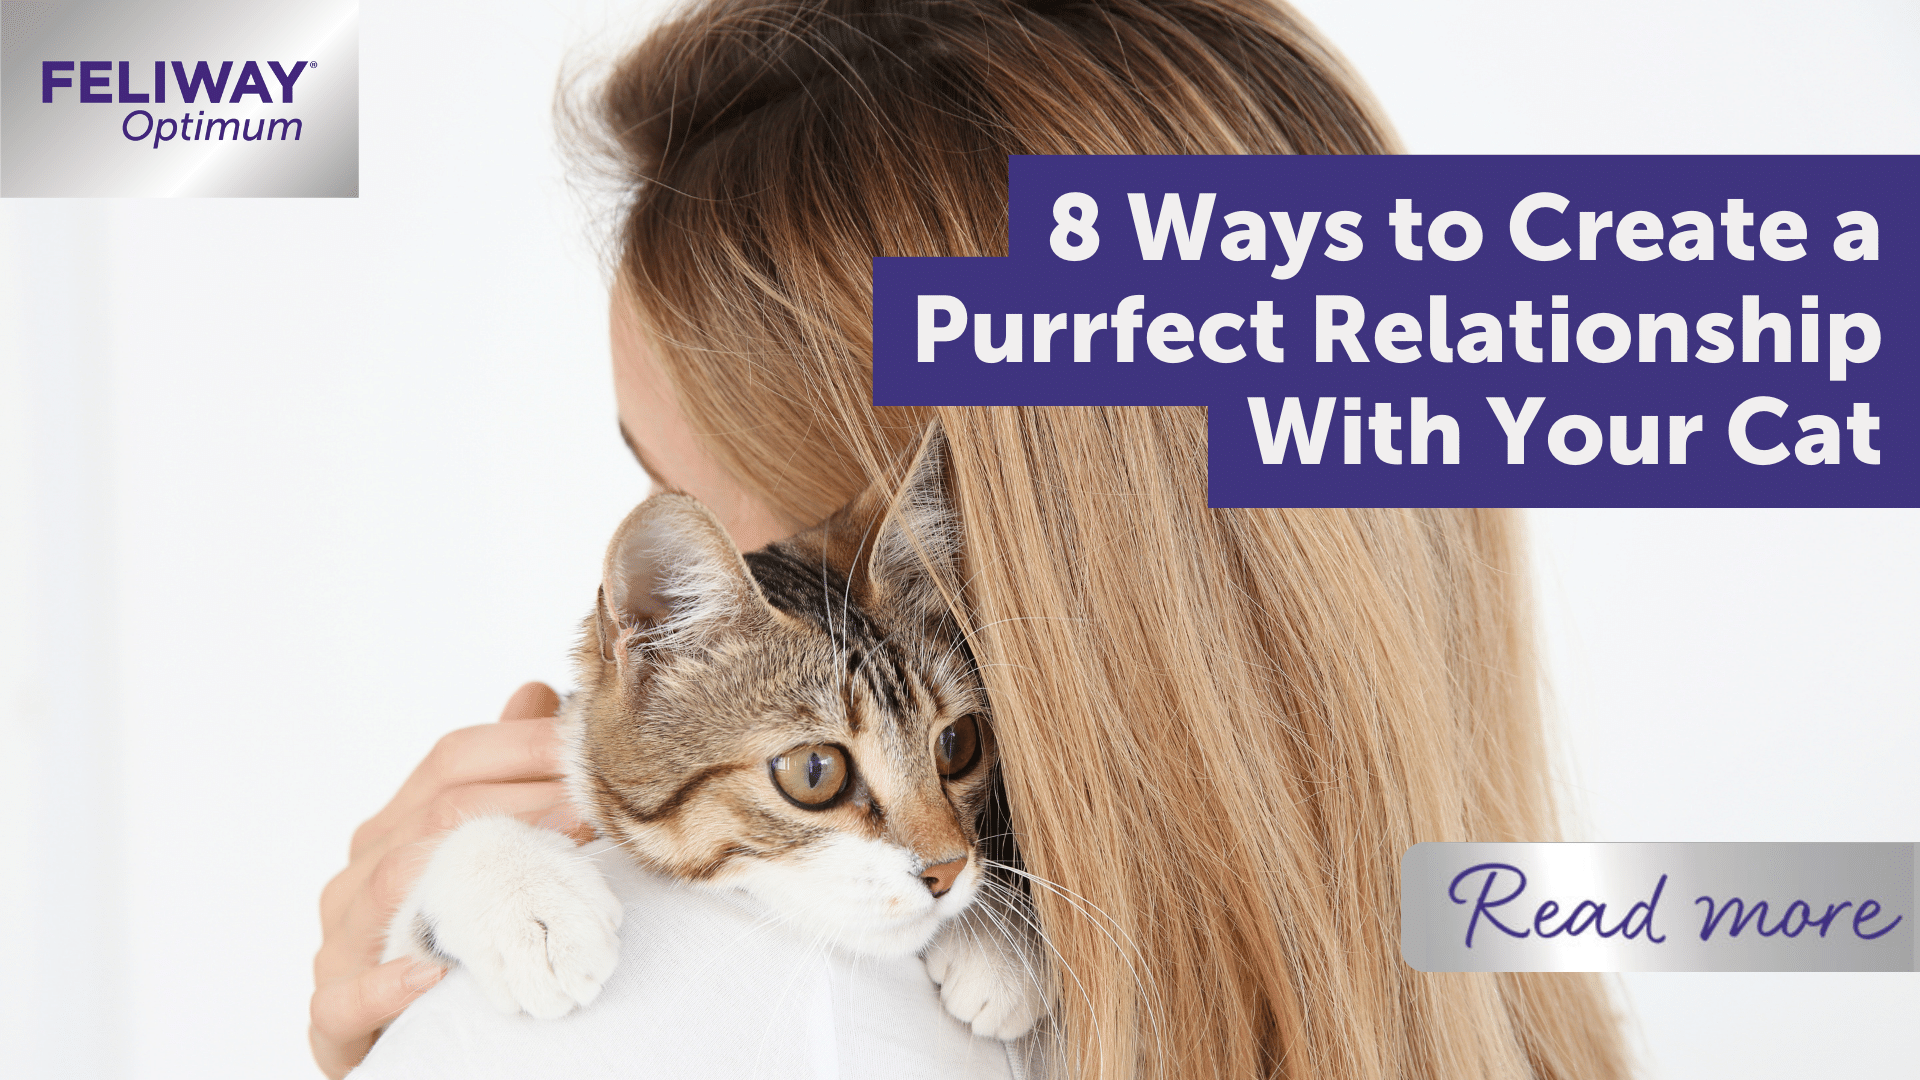 8 Ways to Create a Purrfect Relationship With Your Cat